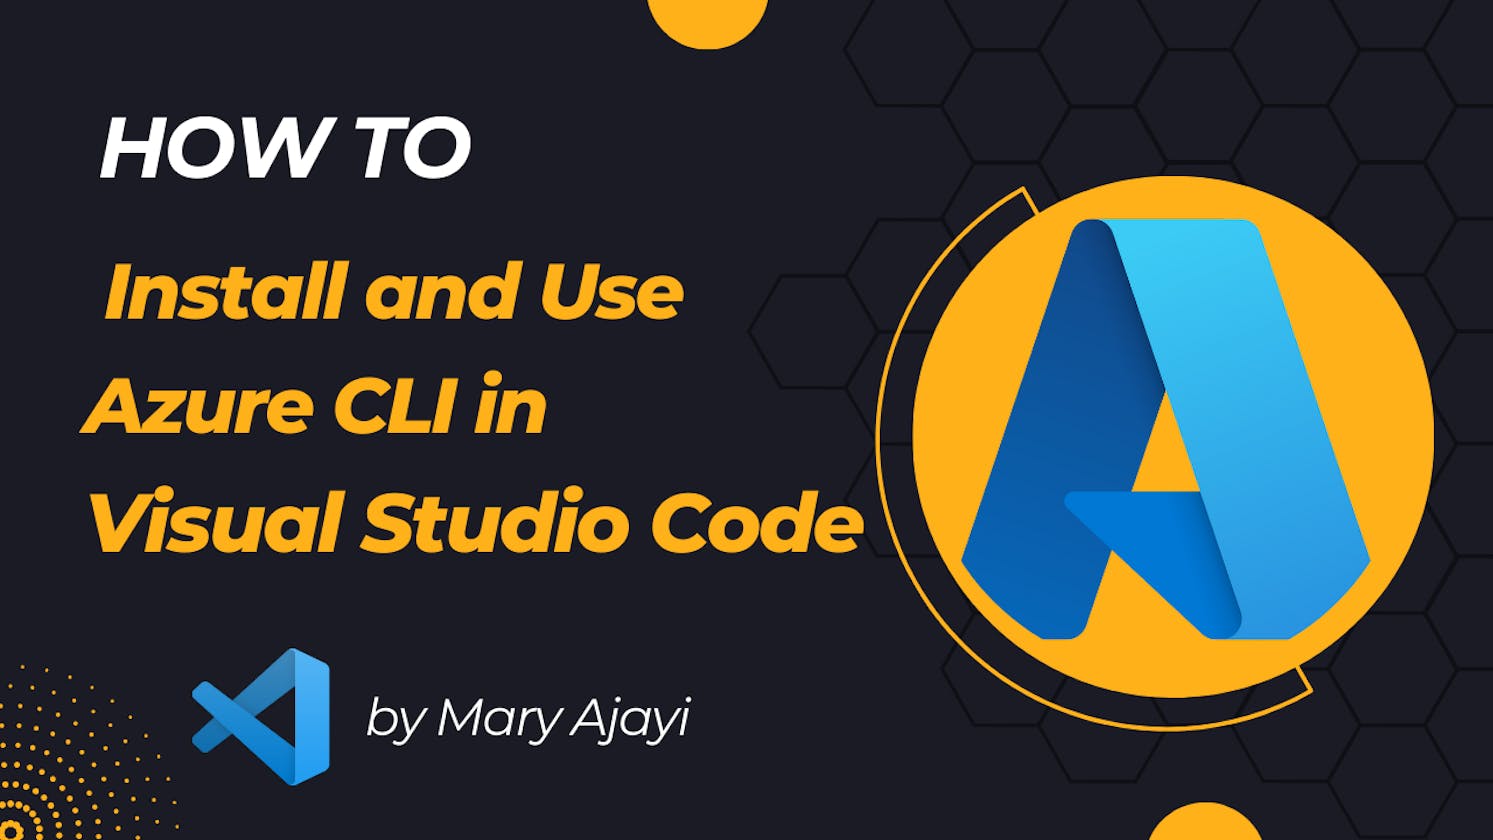 How to Install and Use Azure CLI in Visual Studio Code